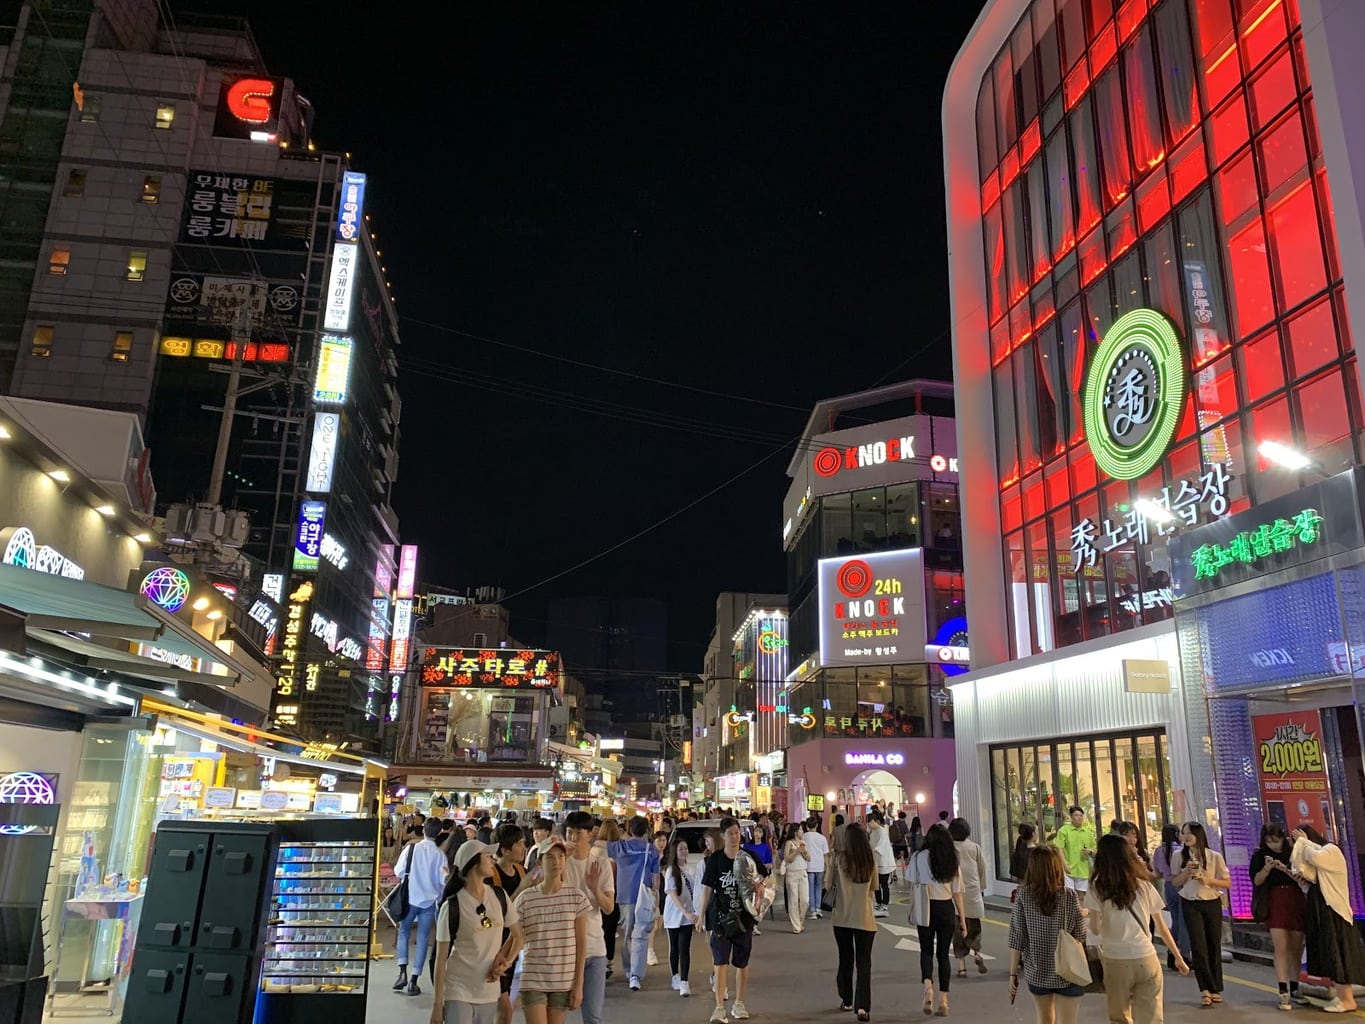 Fashion streets are a great place to shop in South Korea